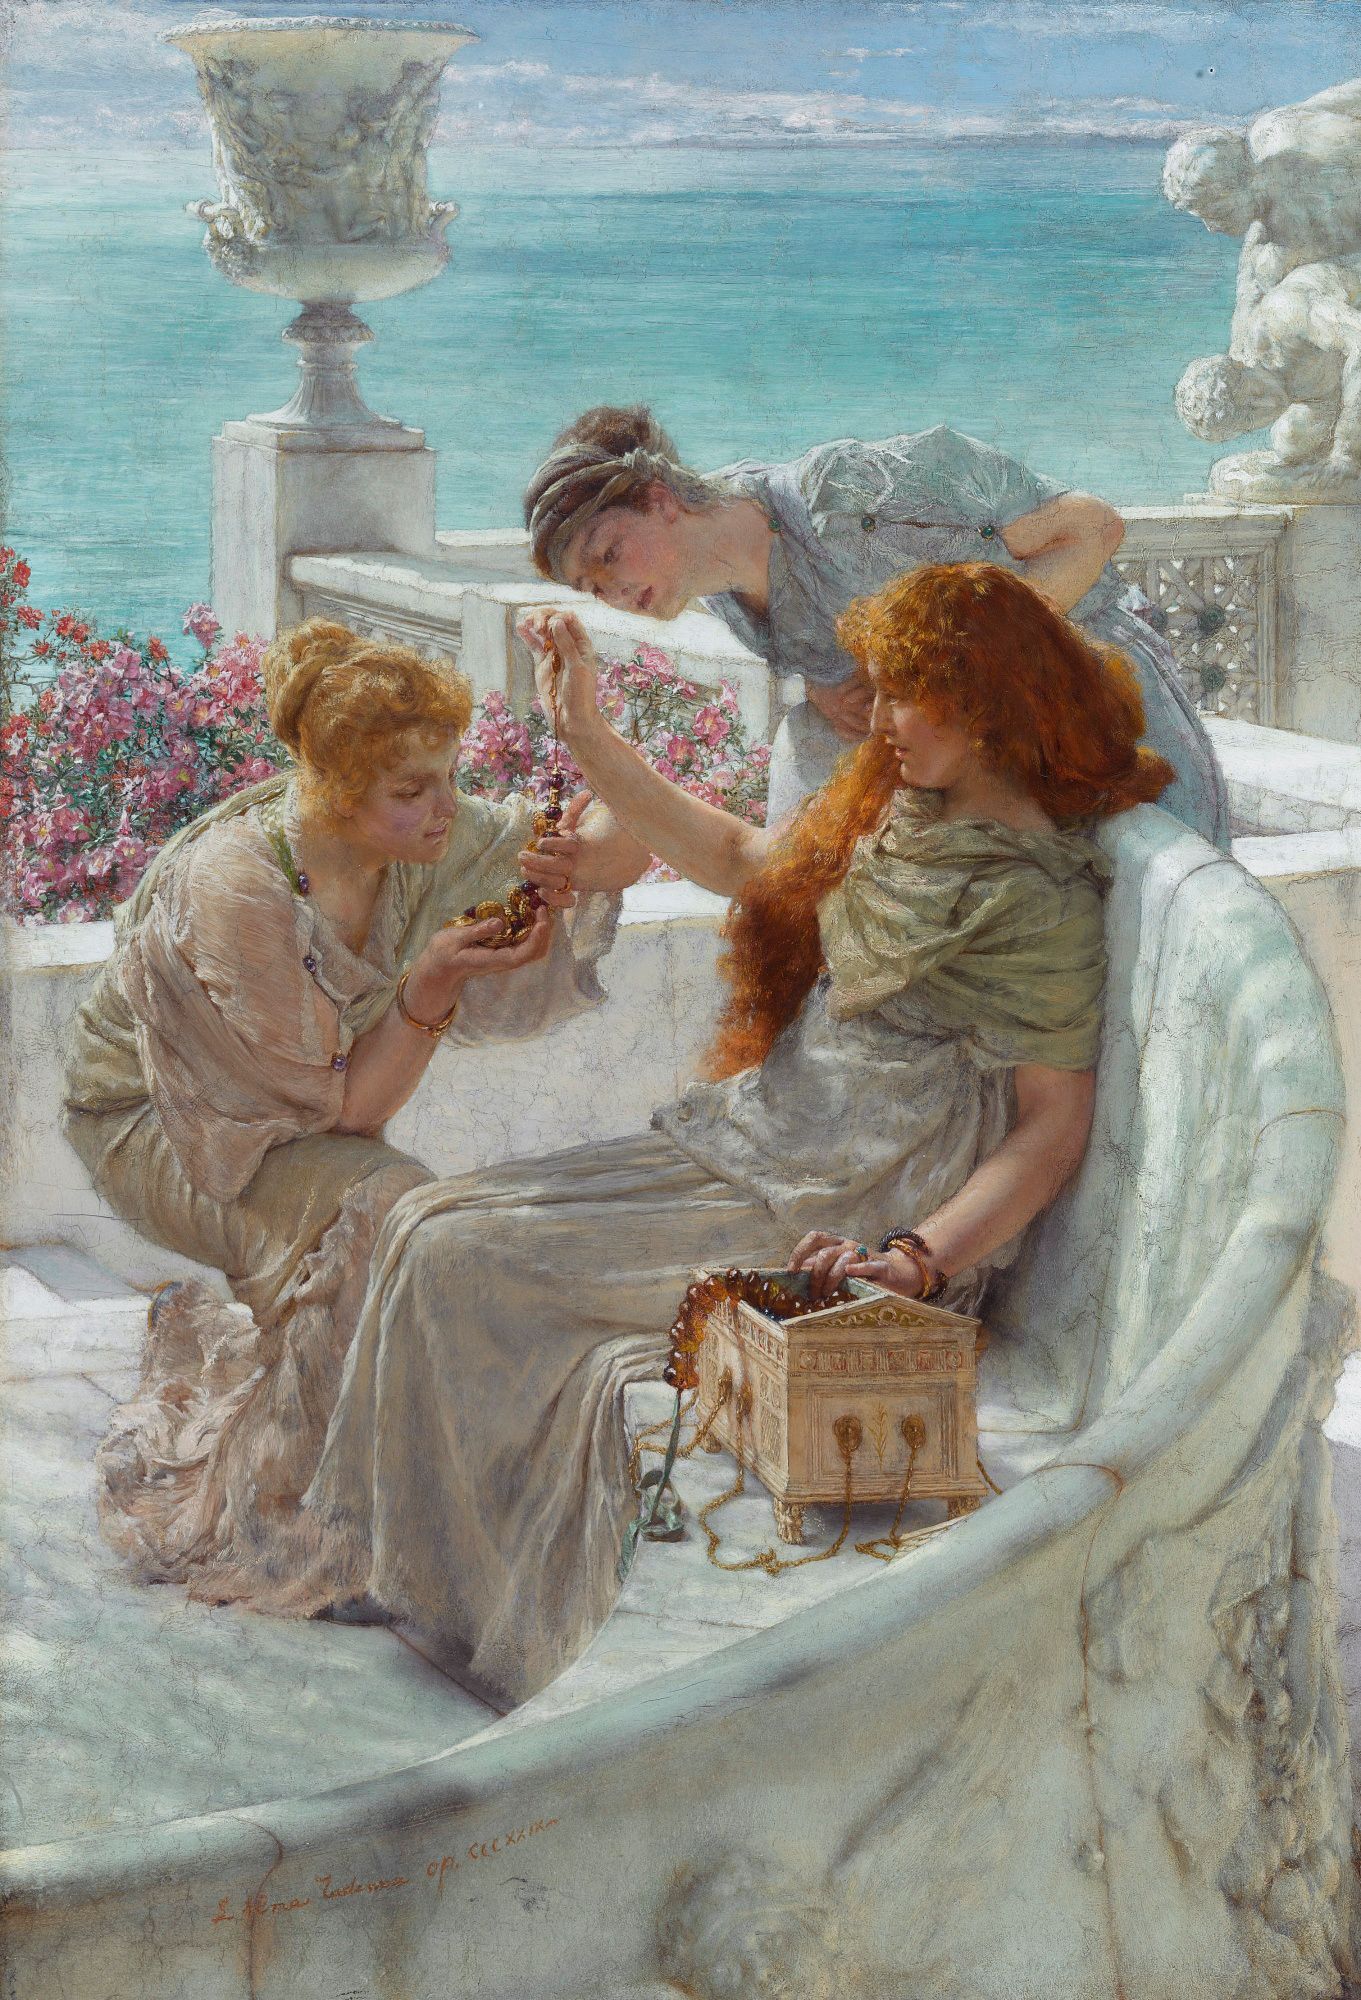 Fortune's Favorite by Lawrence Alma, 1895 (Showing off possibly amber or ambergris beads.)